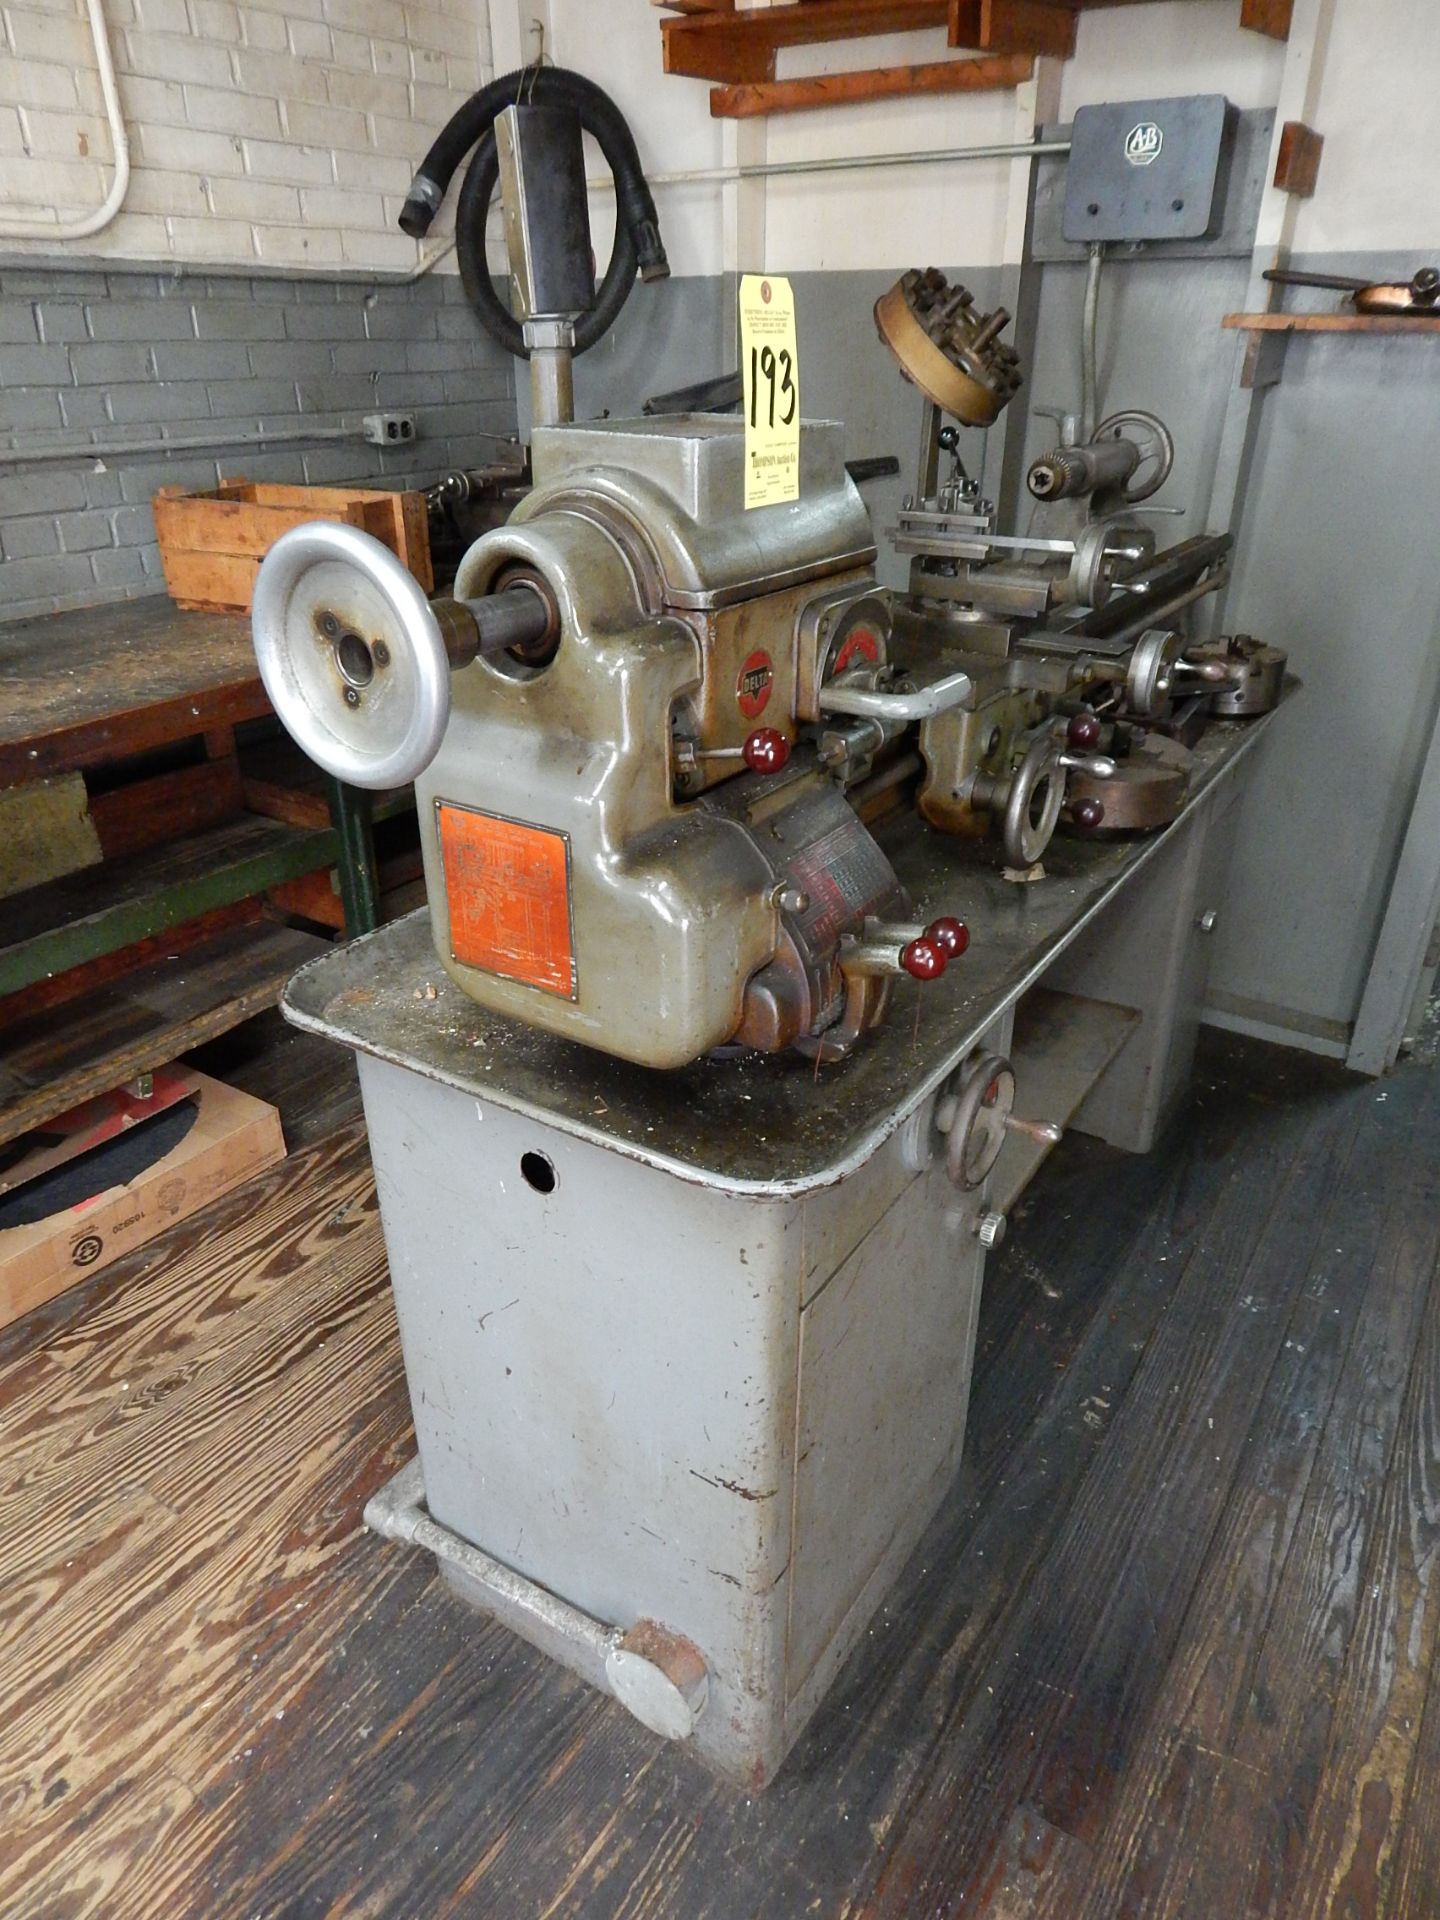 Delta 11" X 36" Tool Room Lathe, s/n 118-5627, Handwheel Collet Chuck and 5C Collets, 6 In. 3-Jaw - Image 4 of 4